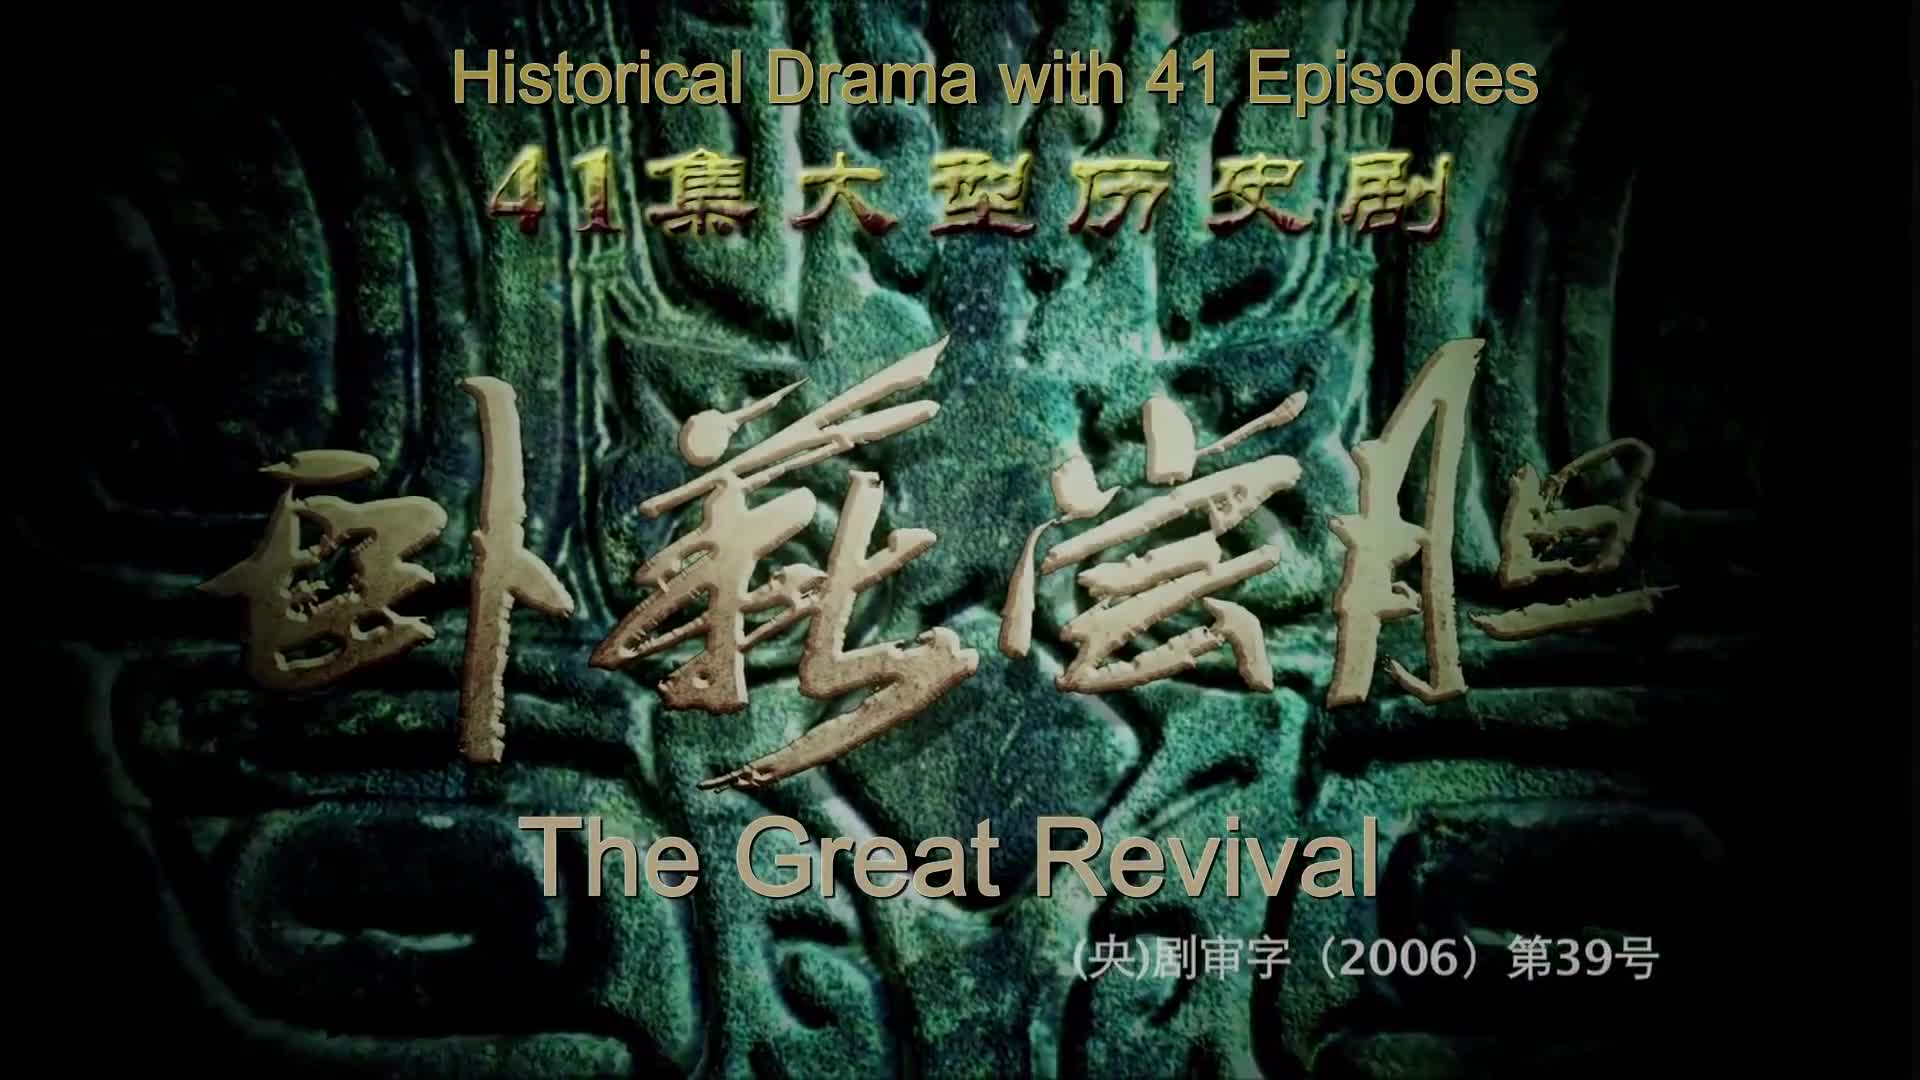 The Great Revival (2007)